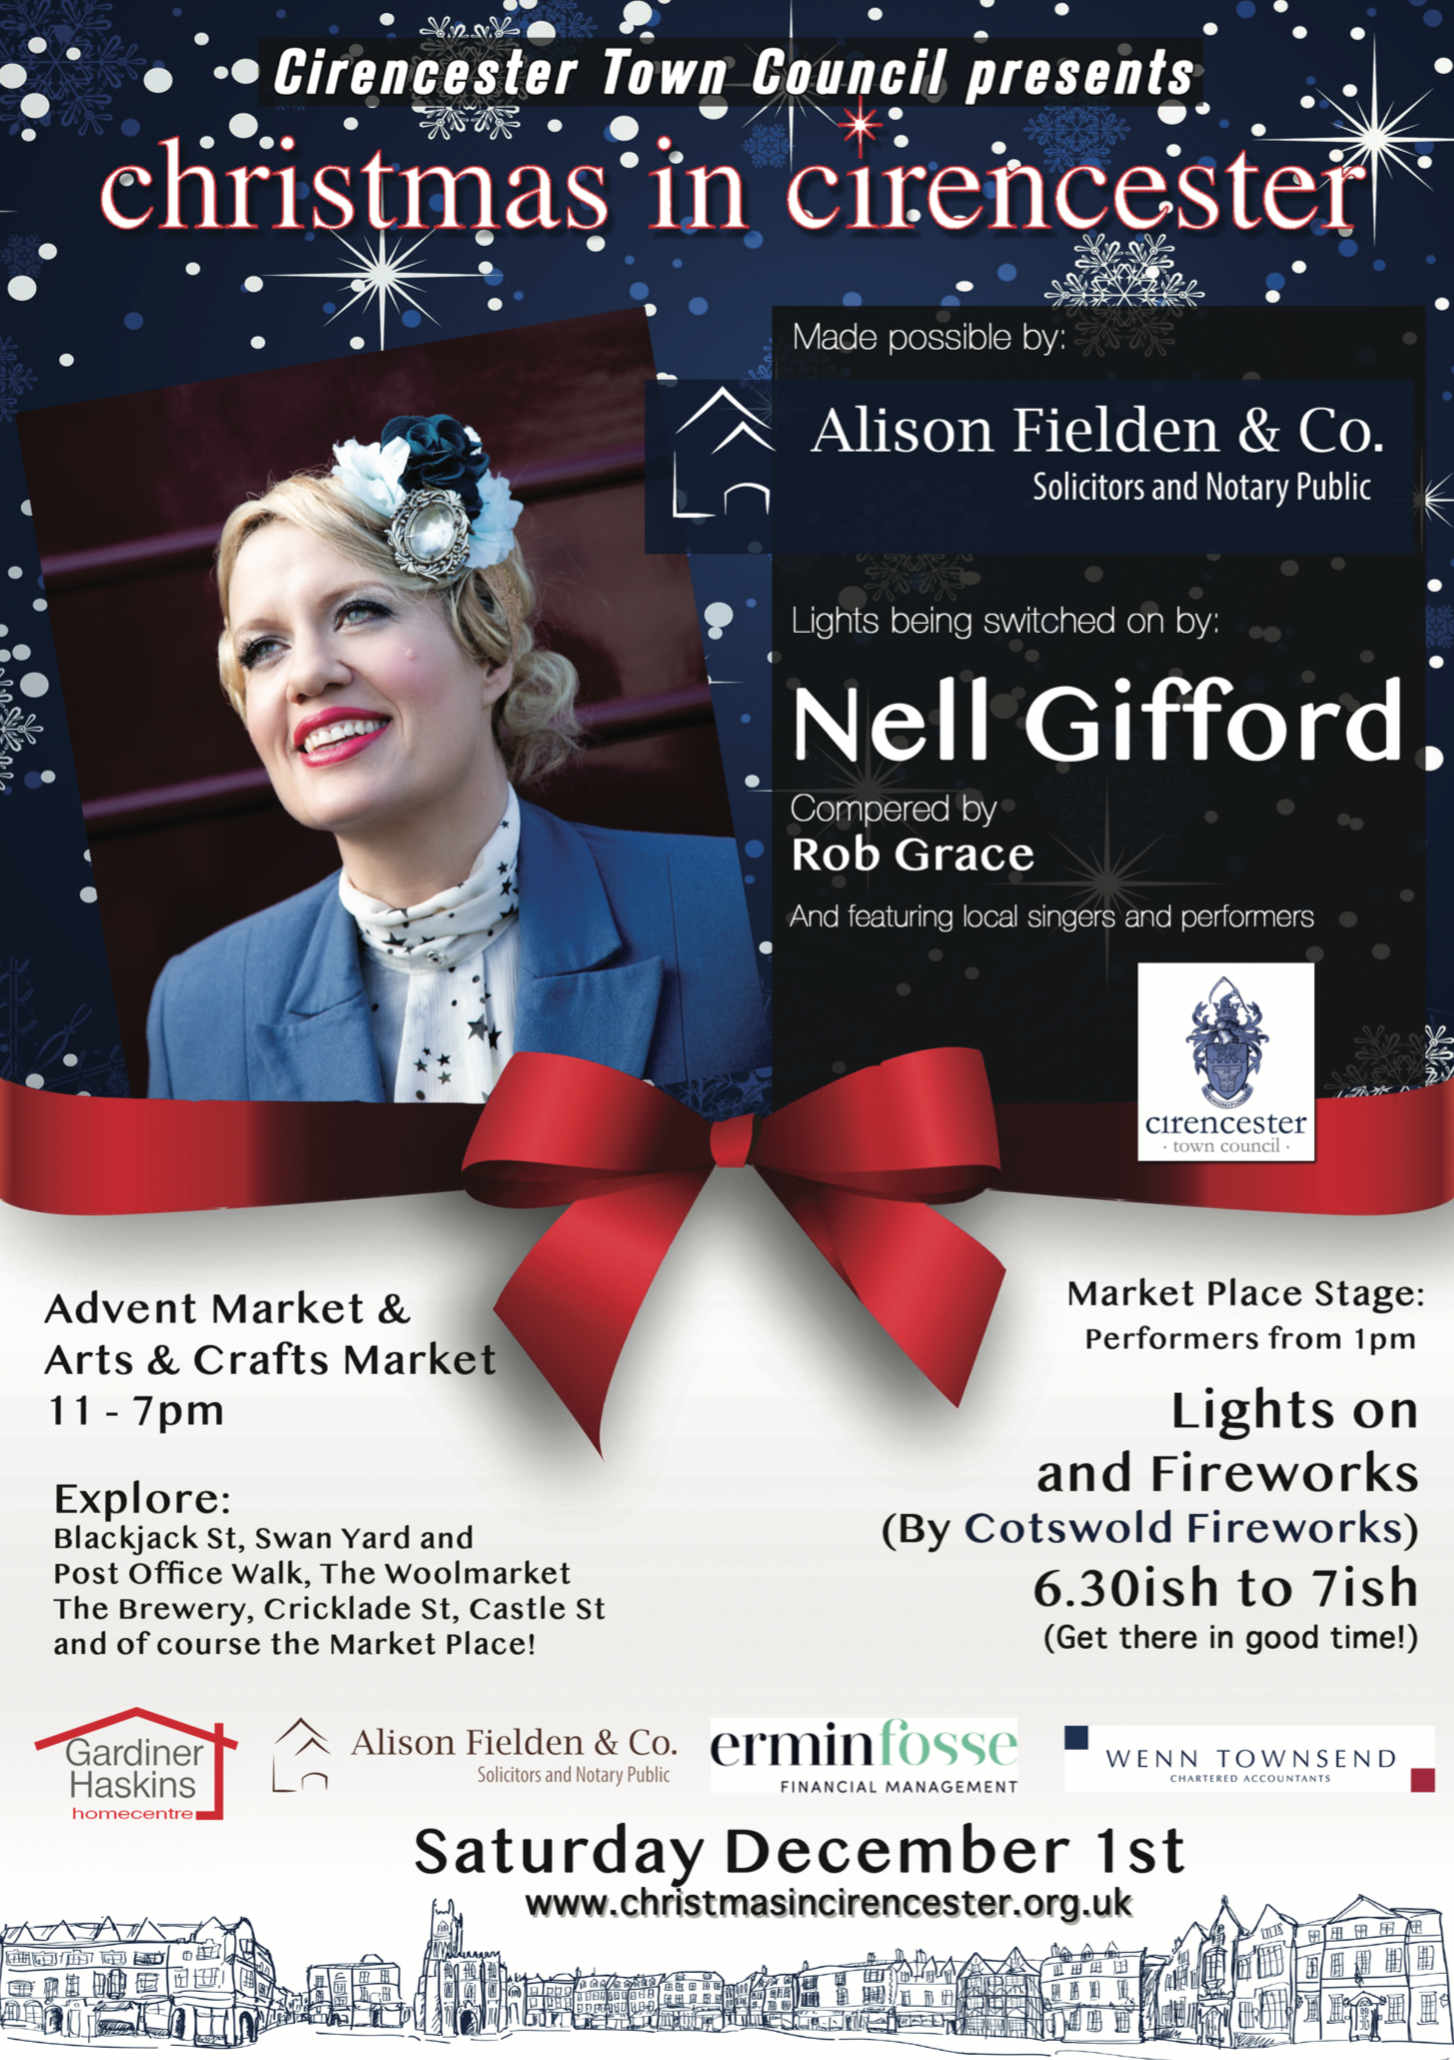 Nell Gifford, founder of Gifford’s Circus, to turn on Cirencester’s Christmas Lights